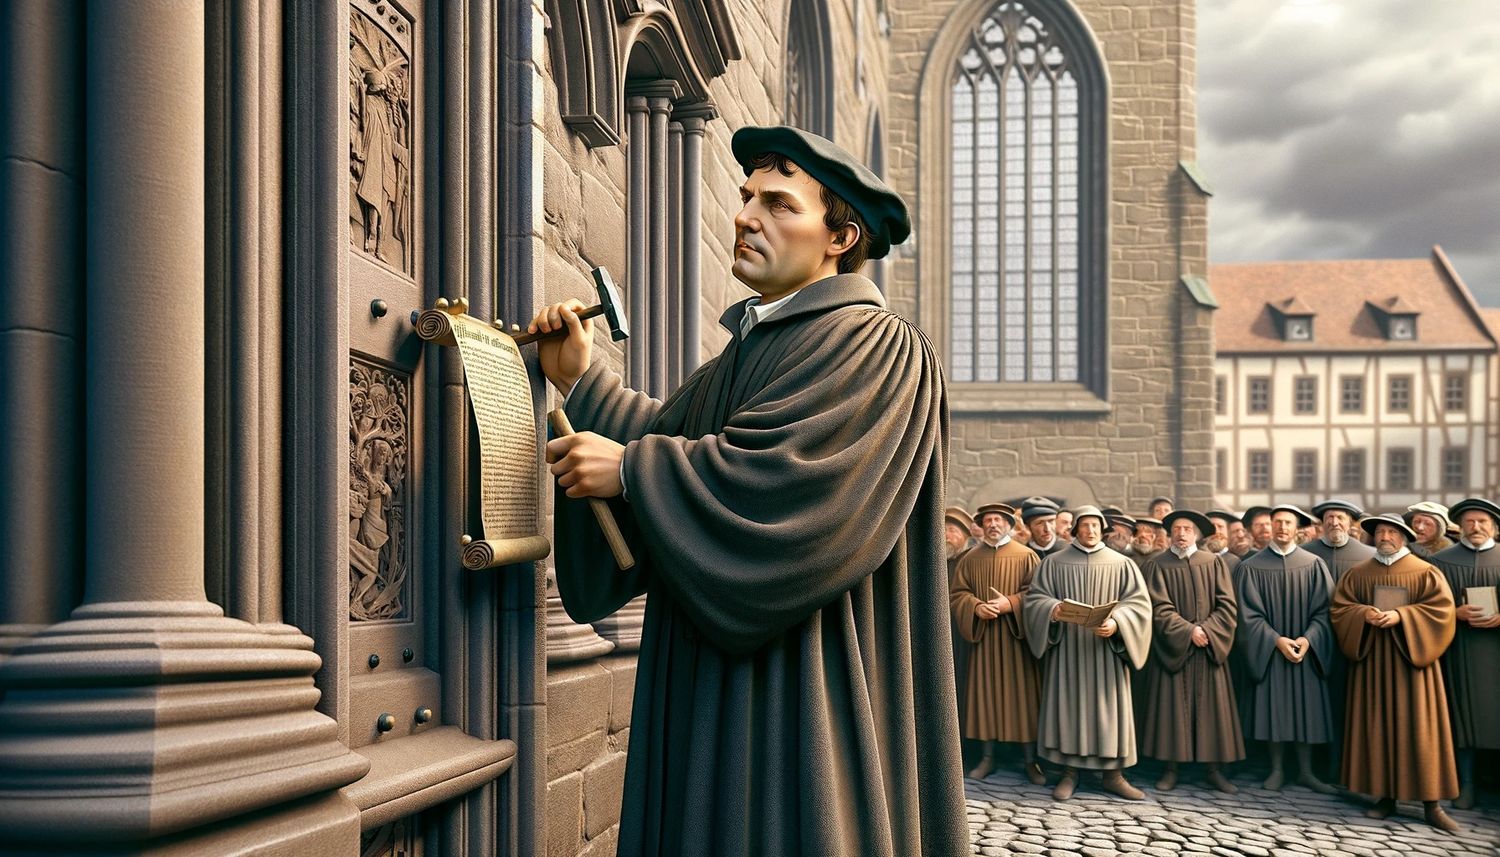 What Was The Main Issue That Sparked The Lutheran Reformation?